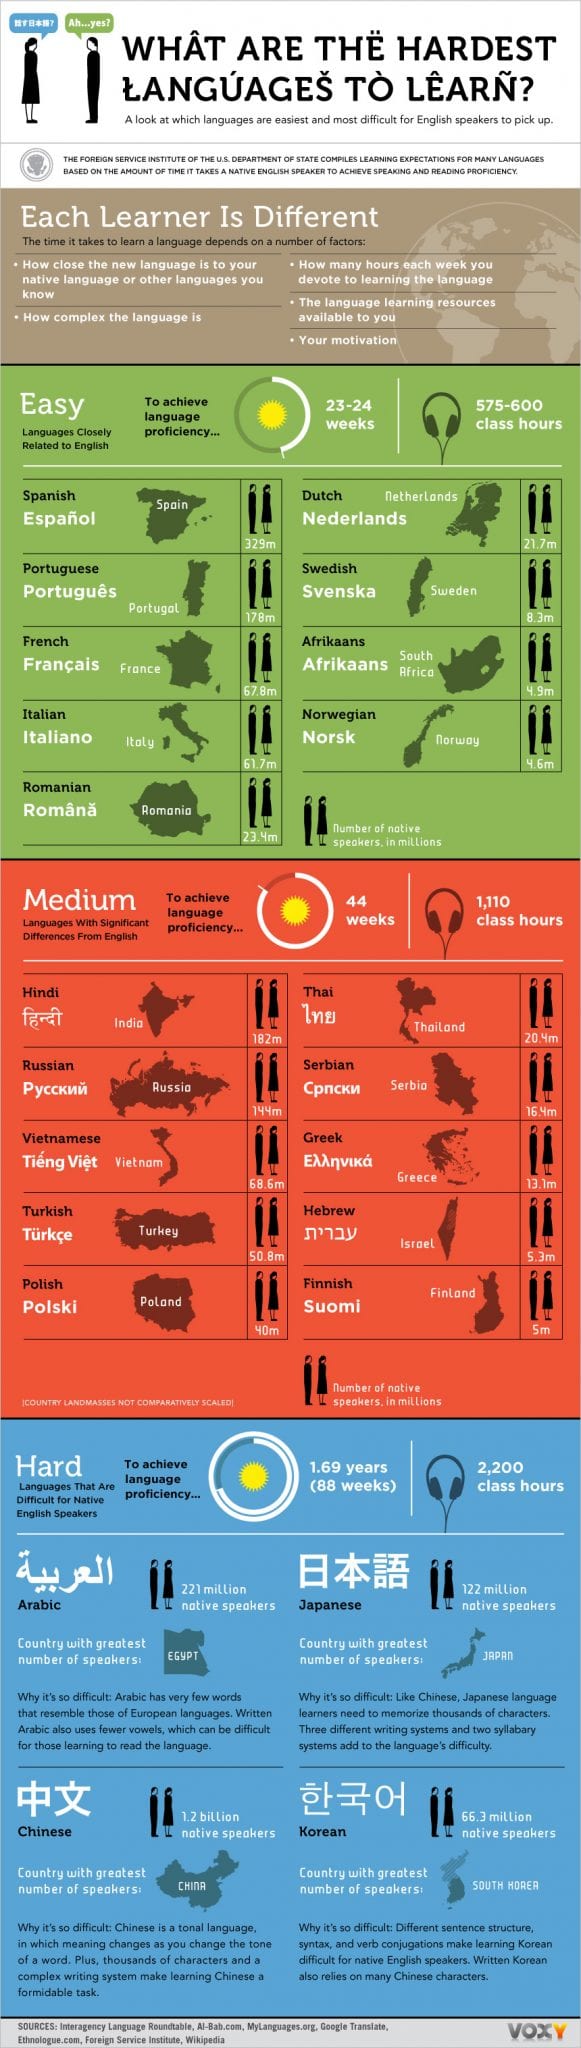 The Easiest and Hardest Languages to Learn for Native English Speakers